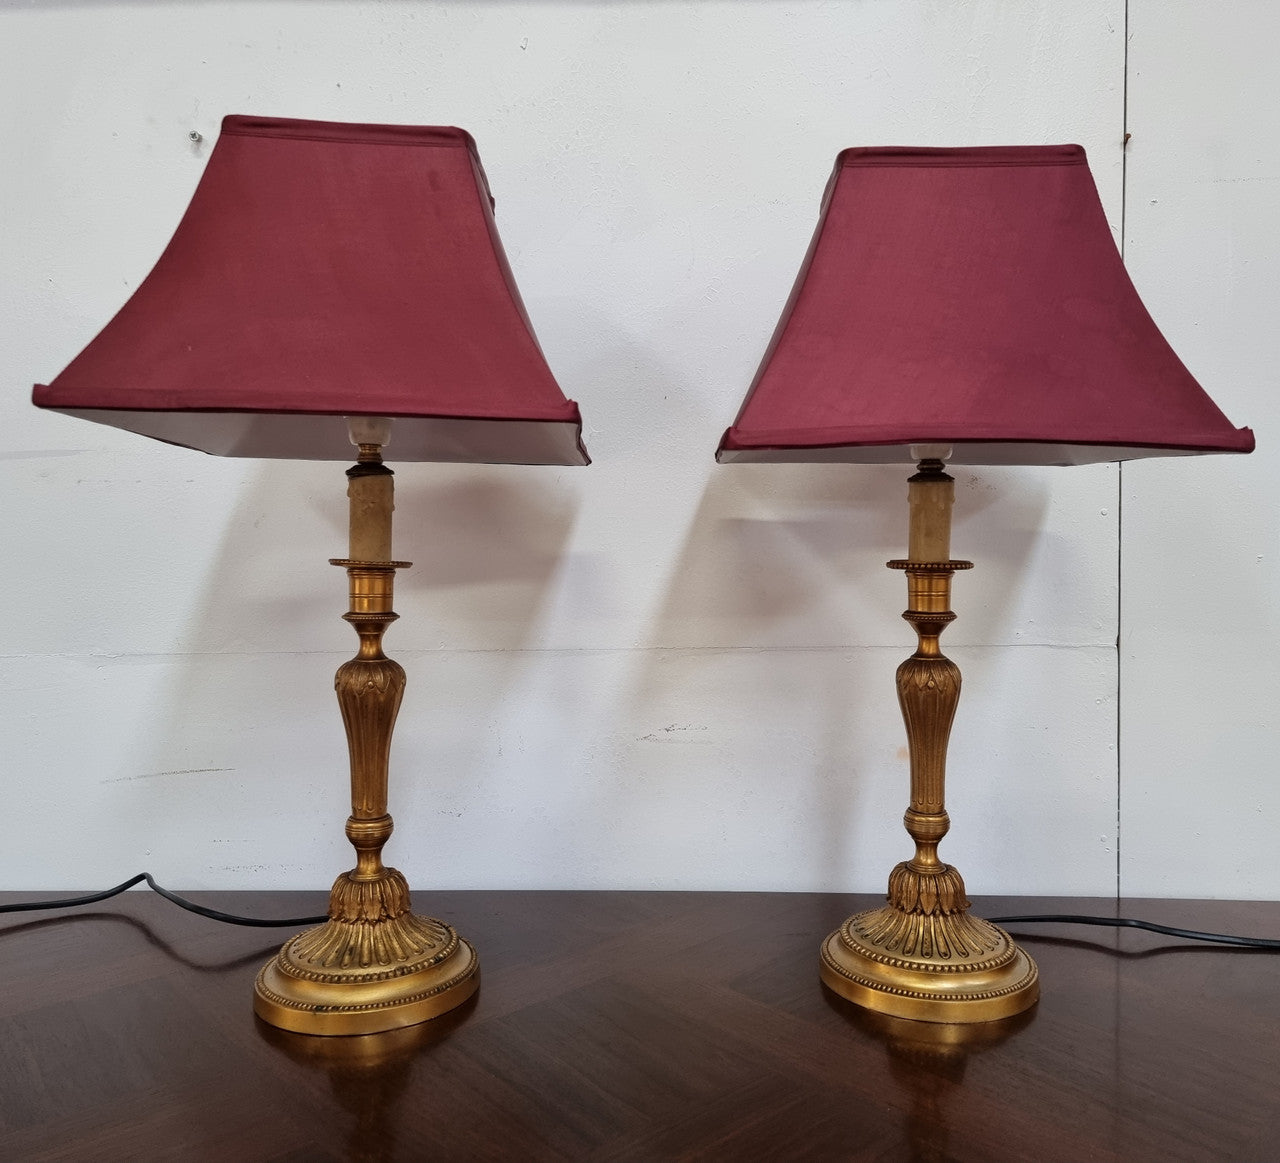 Pair of French Antique 19th Century Gilt Bronze Candlestick Lamps & Shades